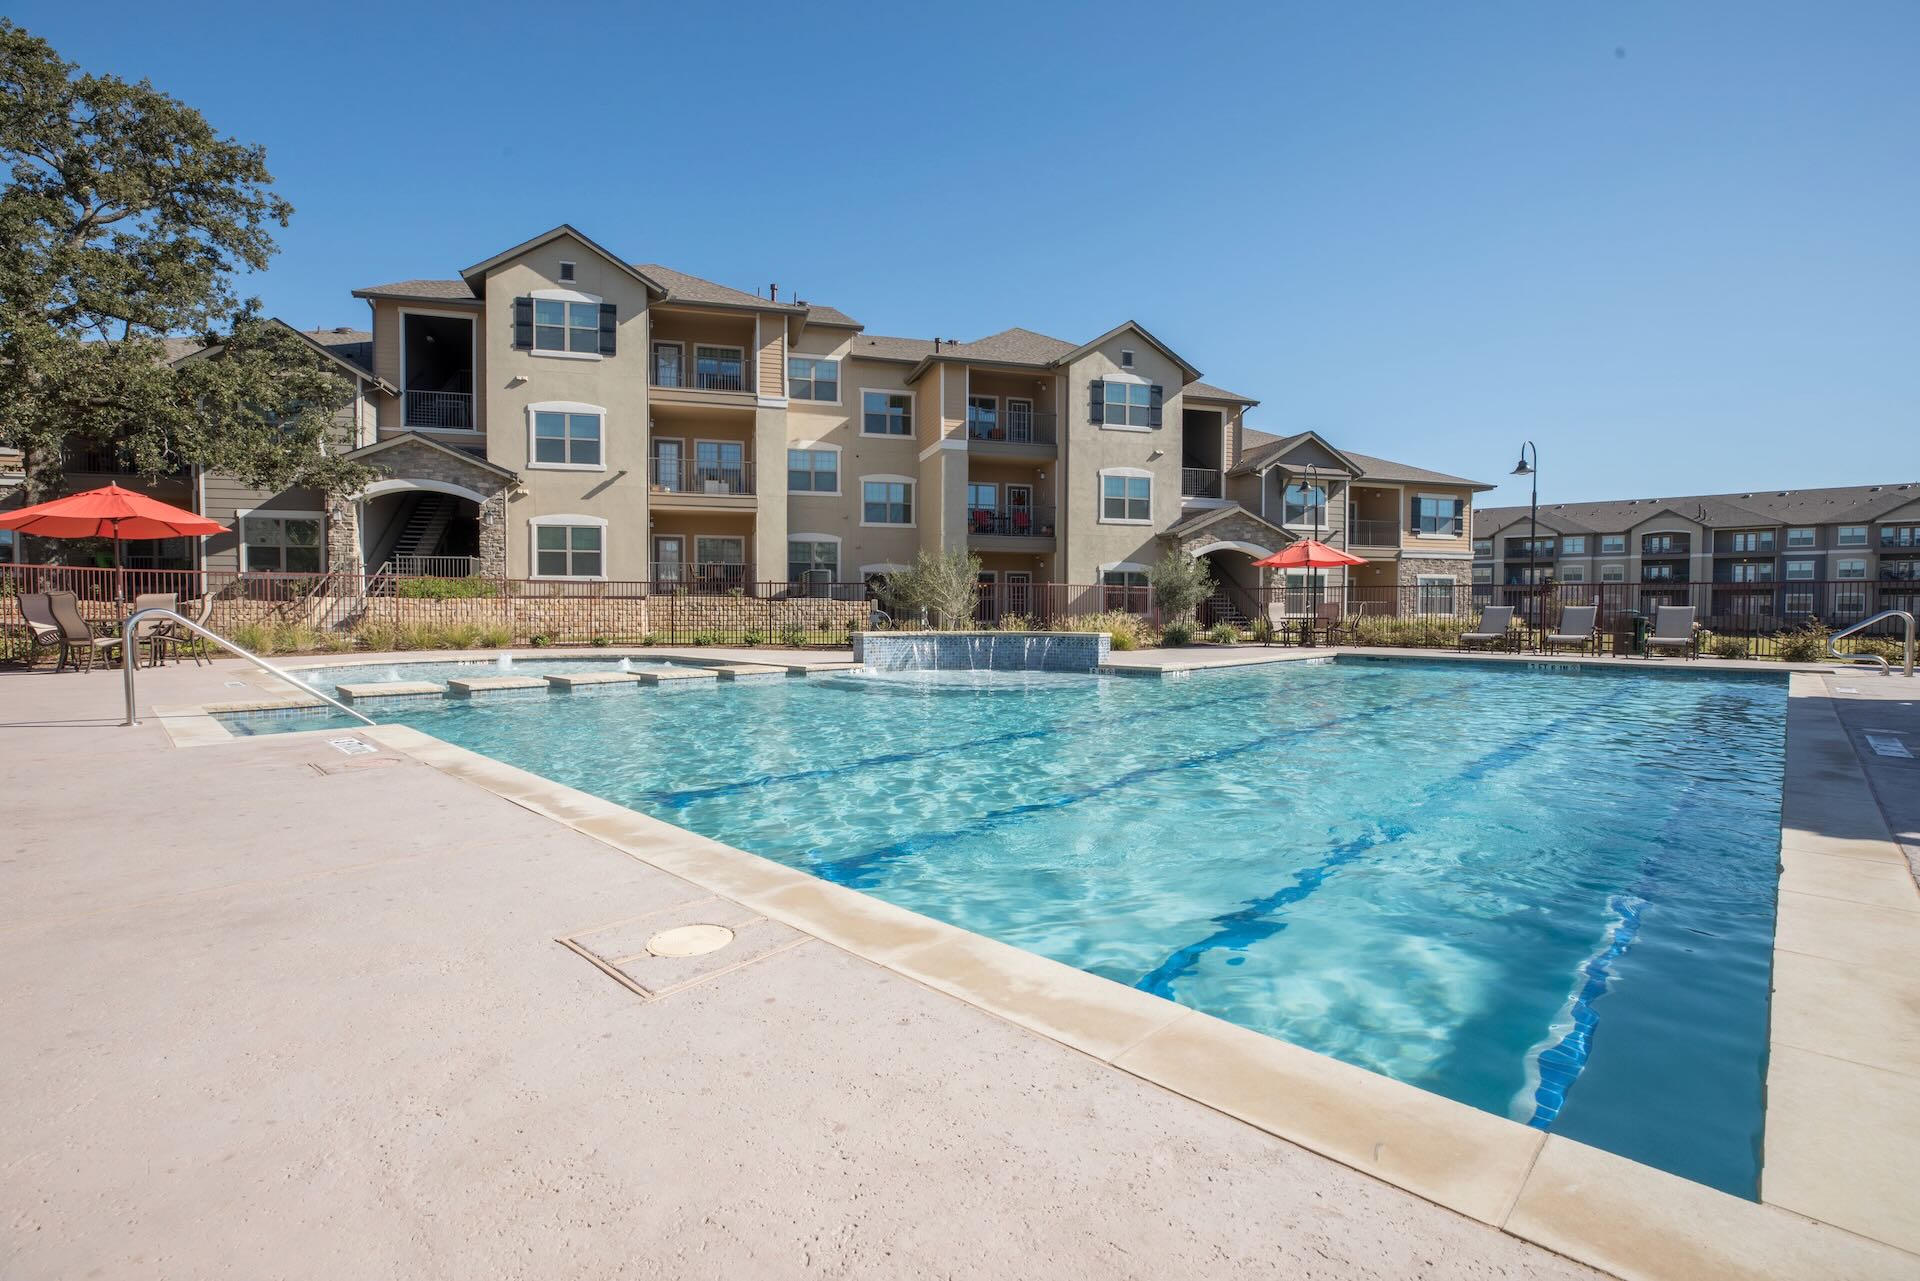 the large outdoor pool at Mariposa Apartment Homes South Broadway in Texas